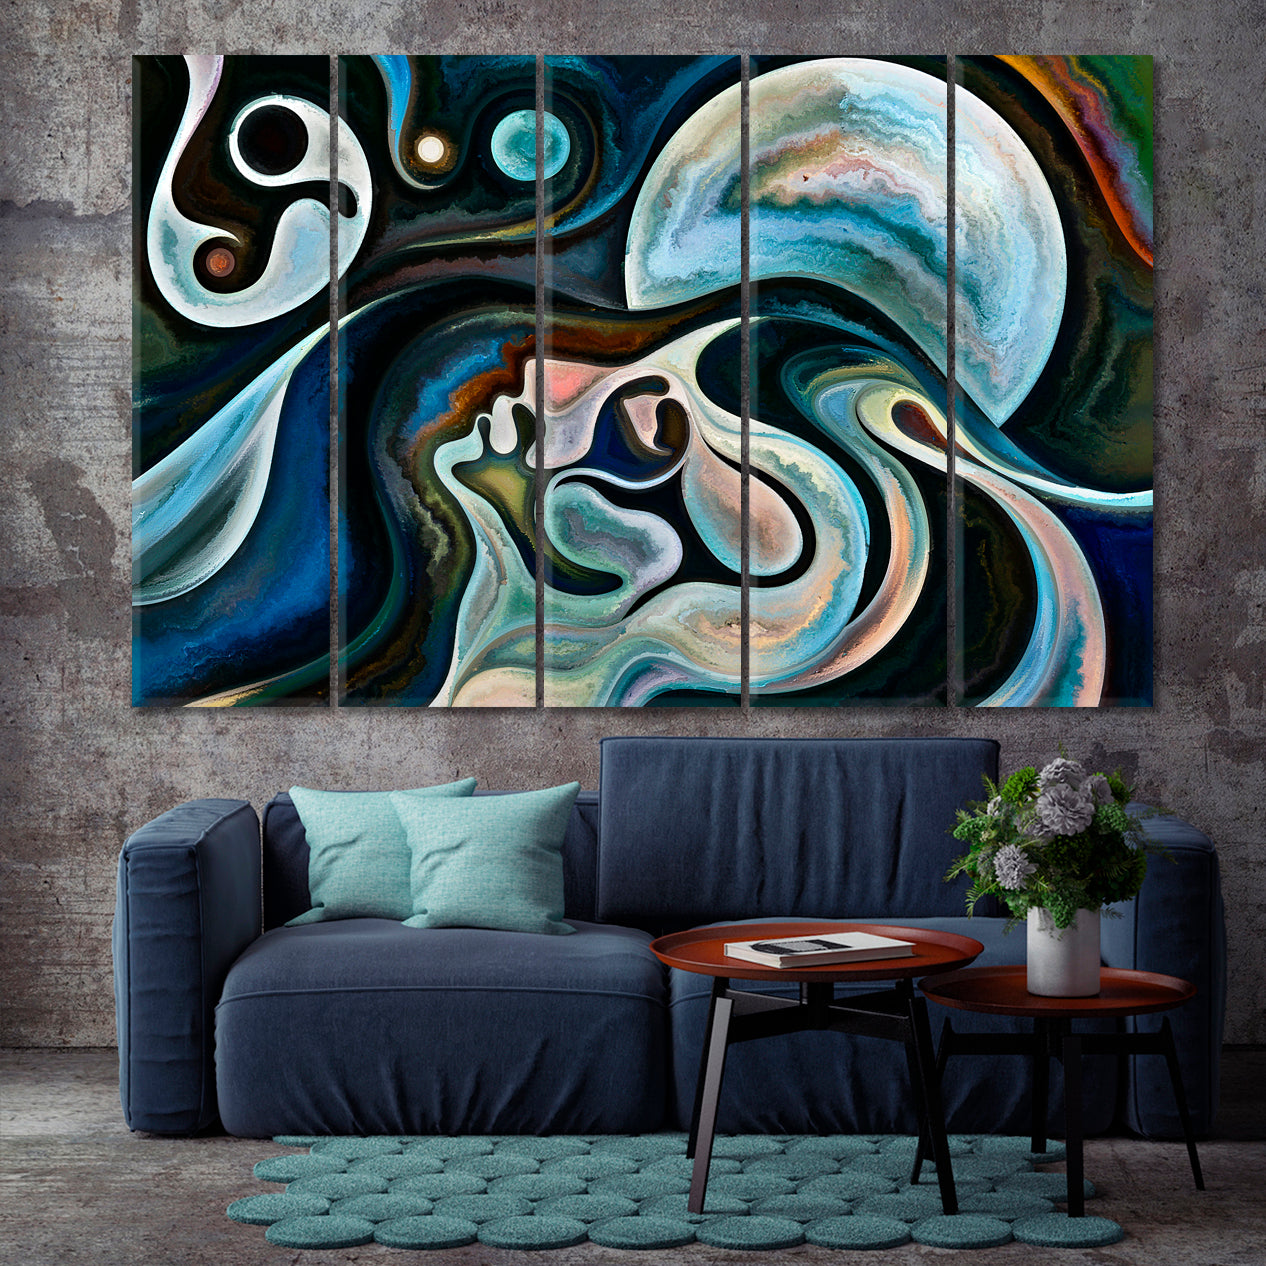 YIN YANG AND THE CYCLE OF LIFE Modern Painting Abstract Art Print Artesty 5 panels 36" x 24" 